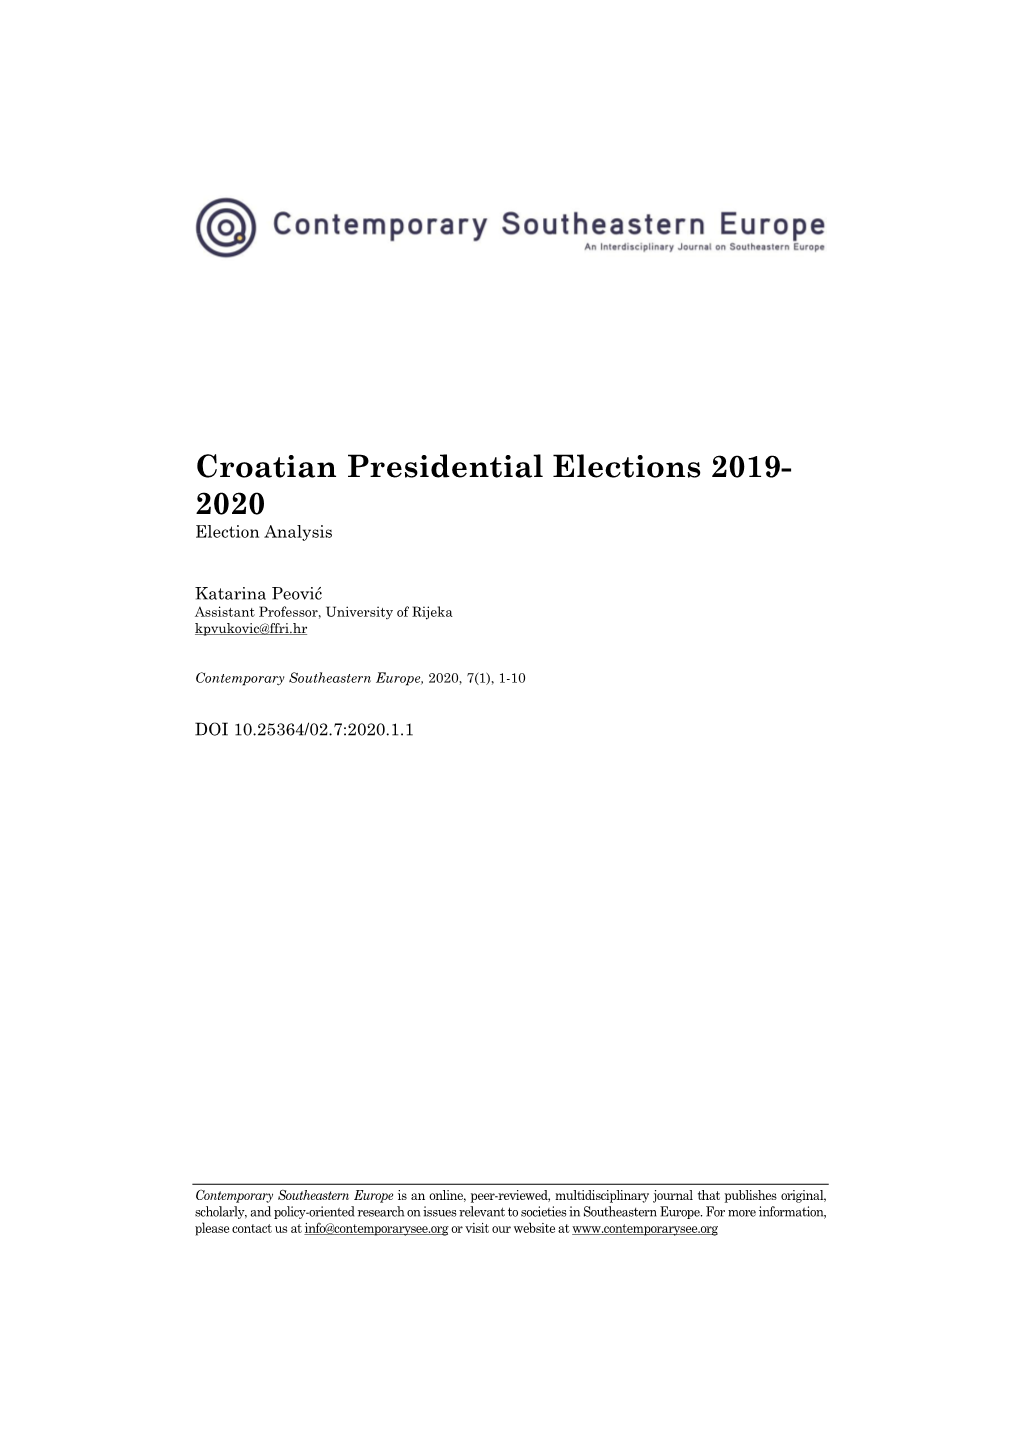 Croatian Presidential Elections 2019- 2020 Election Analysis